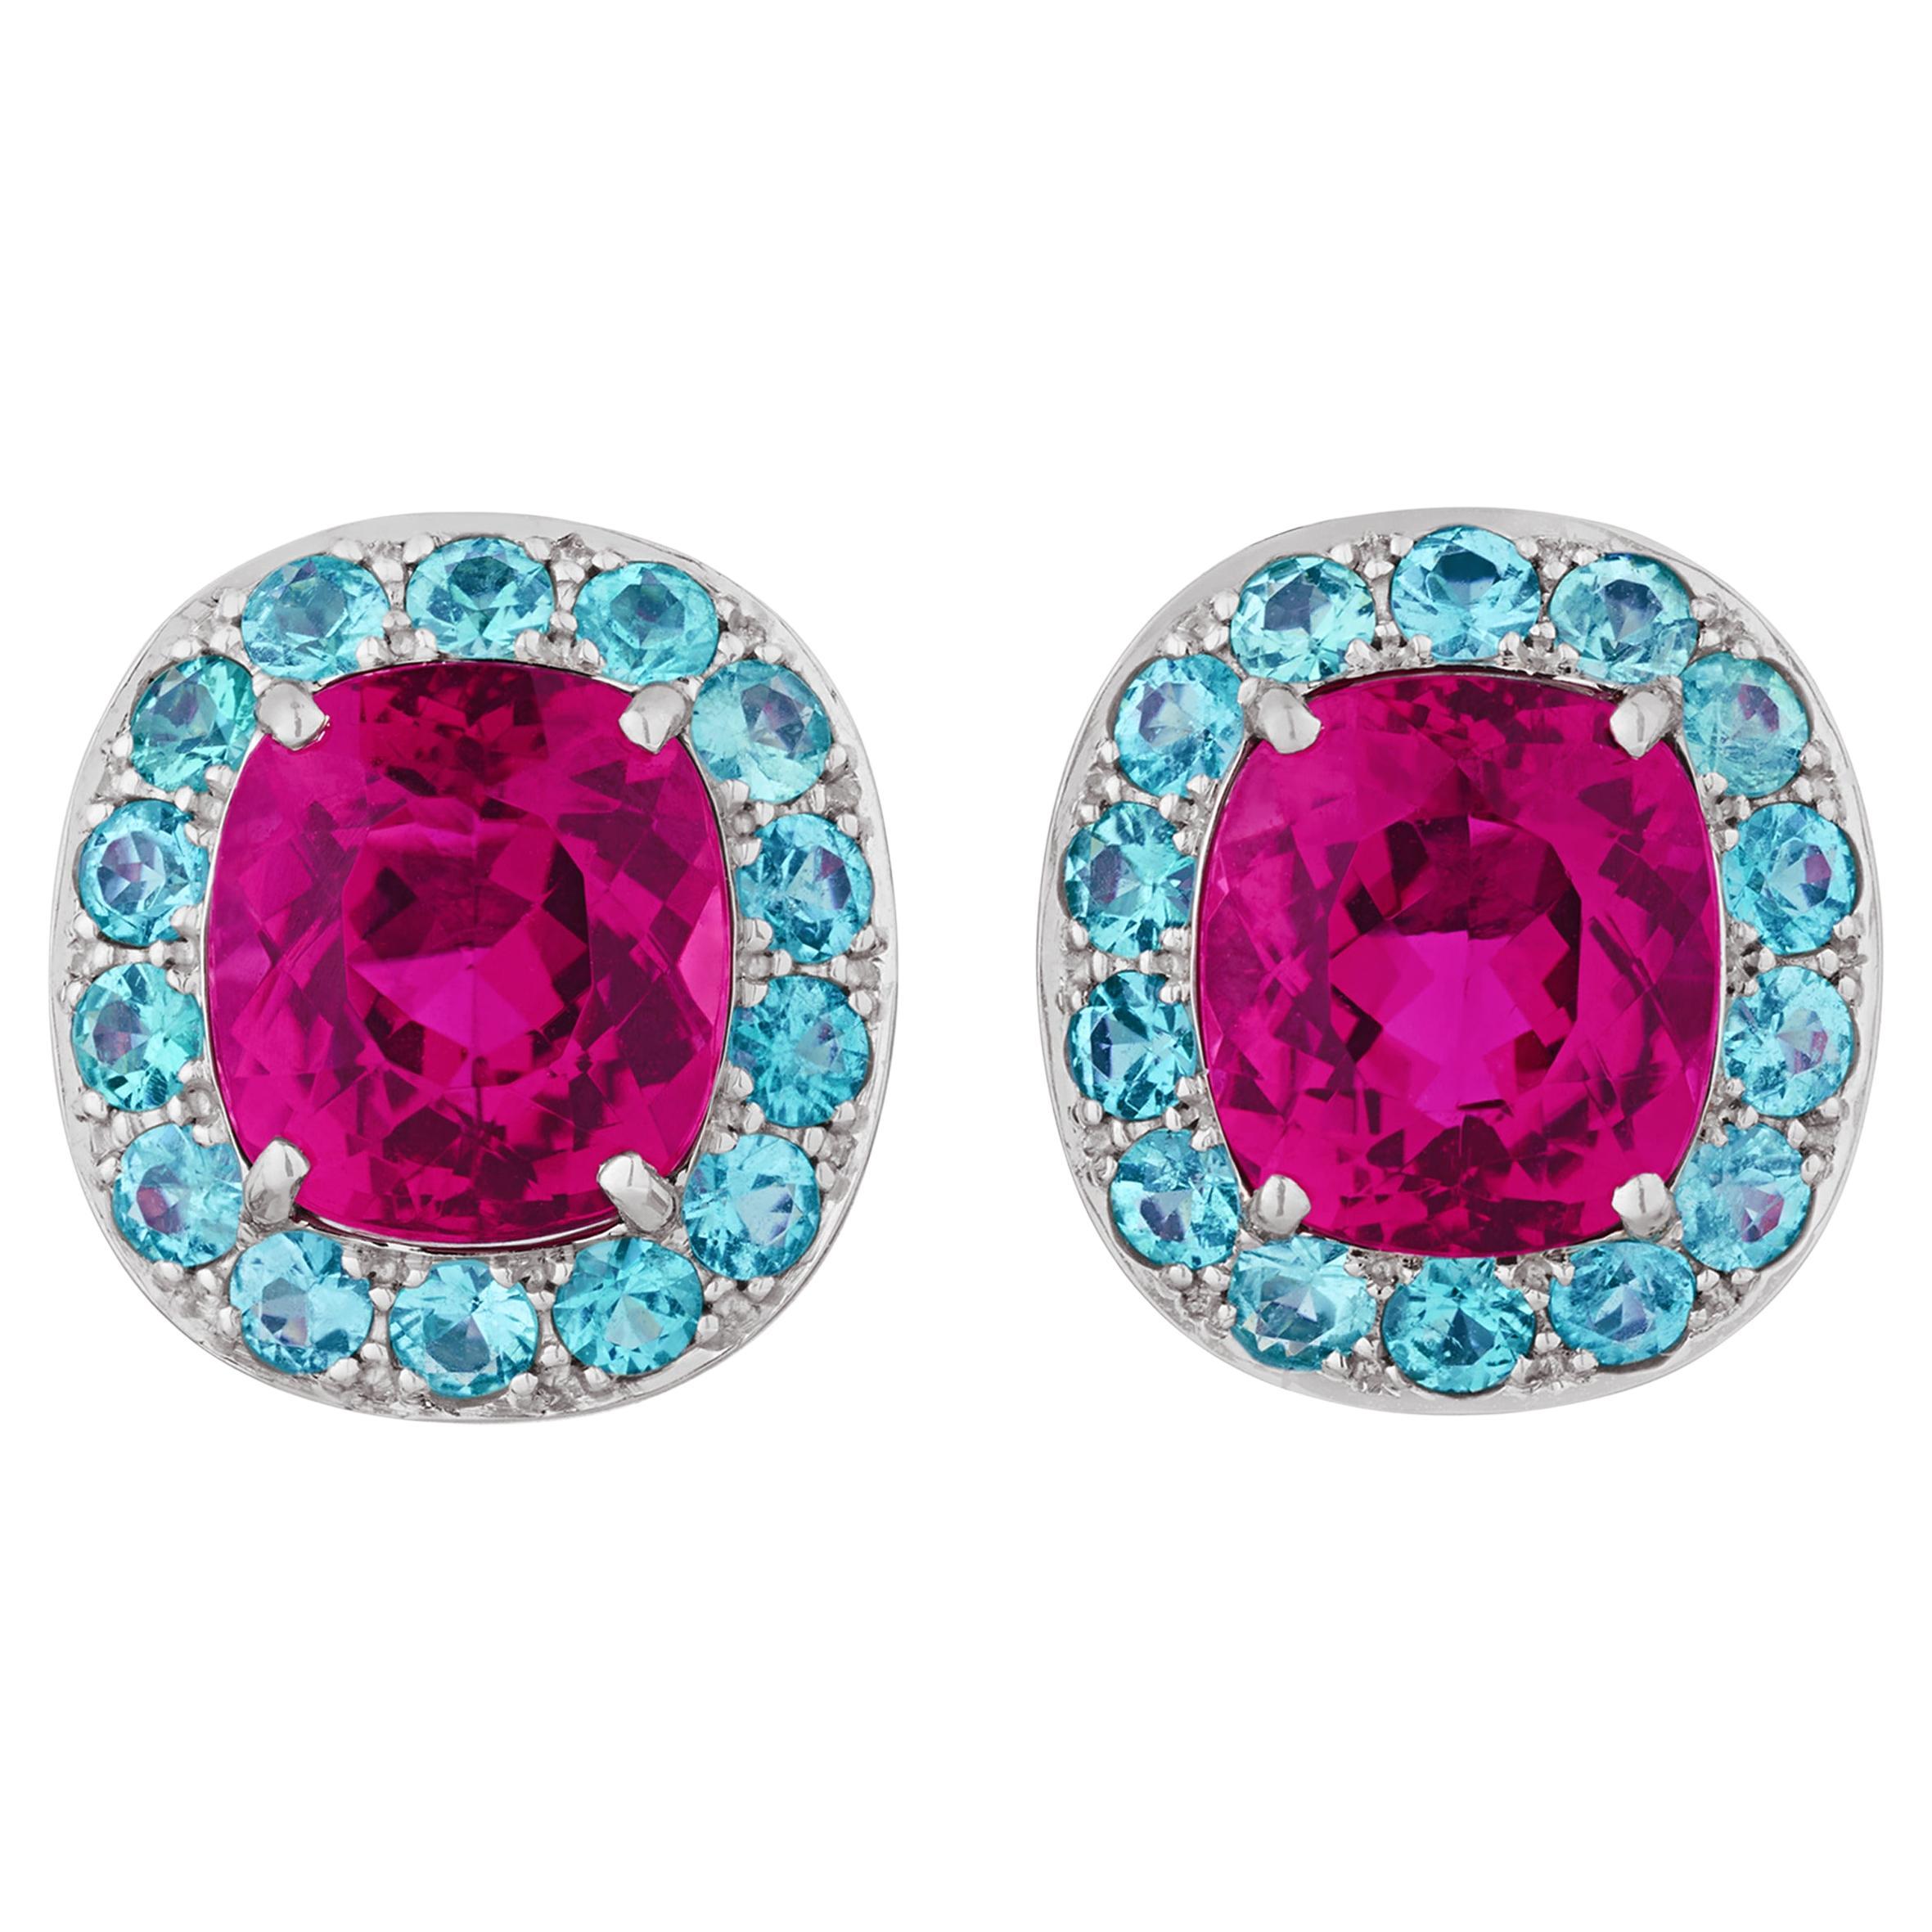 Rubellite Earrings With Paraiba Accents By Oscar Heyman, 4.55 Carats